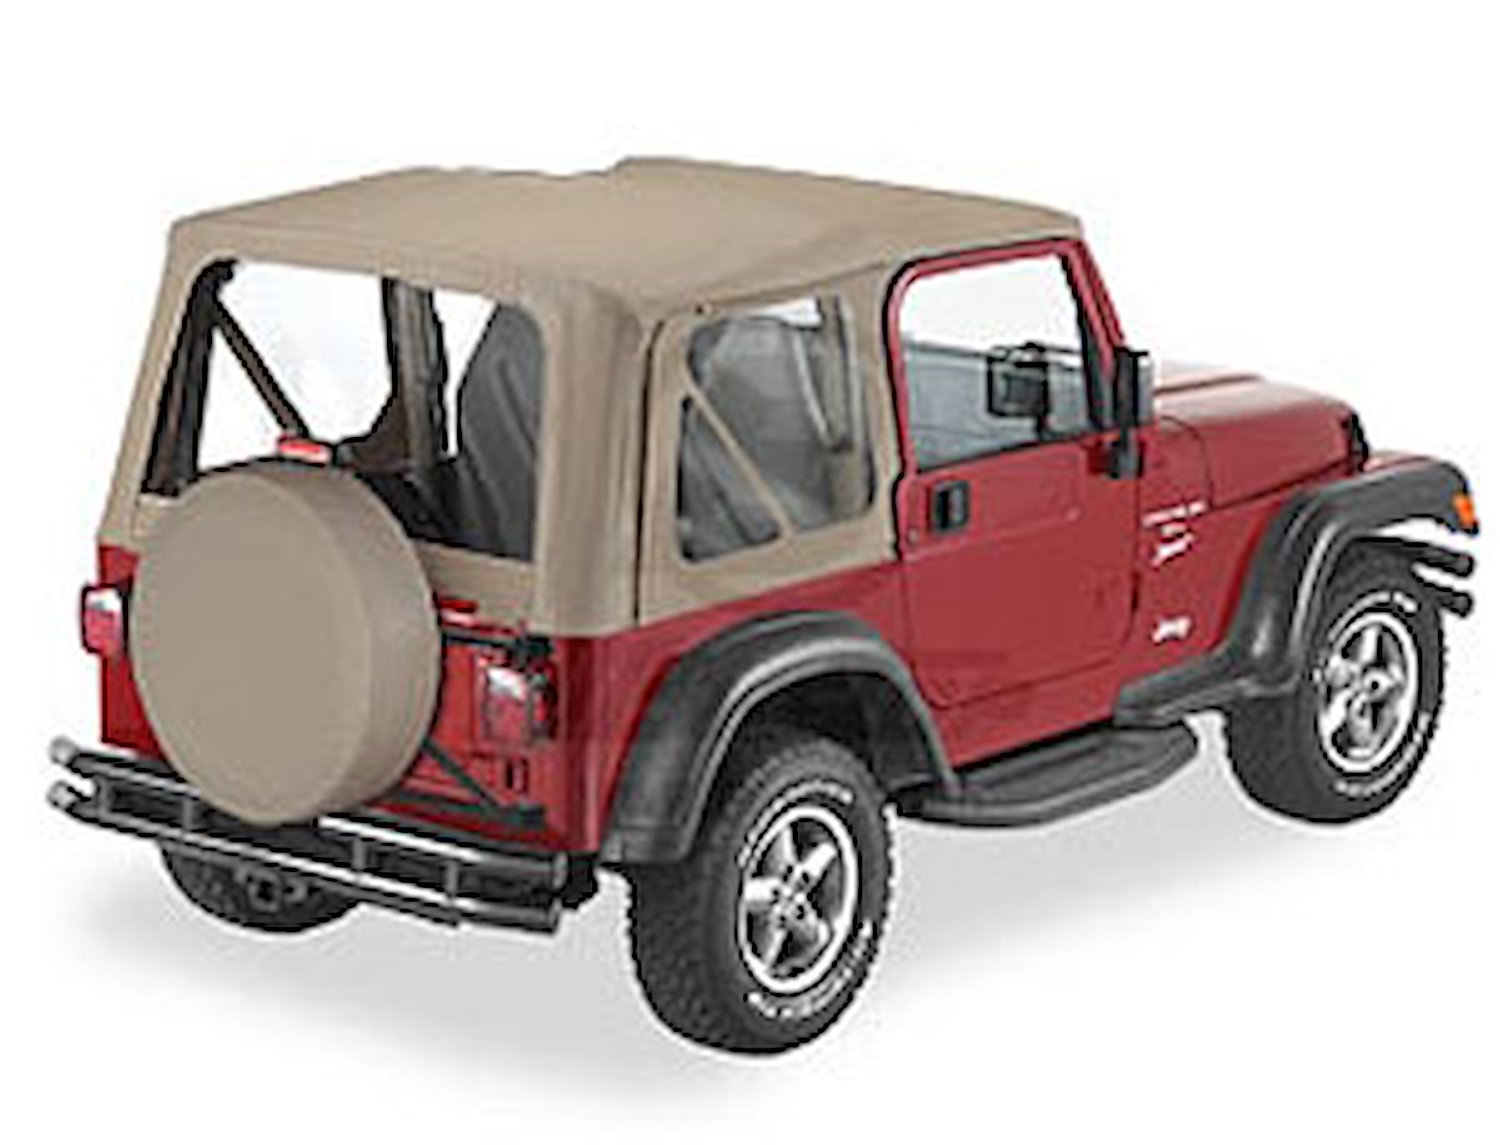 Replace-A-Top, Dark Tan, Clear Windows, No Door Skins Included,